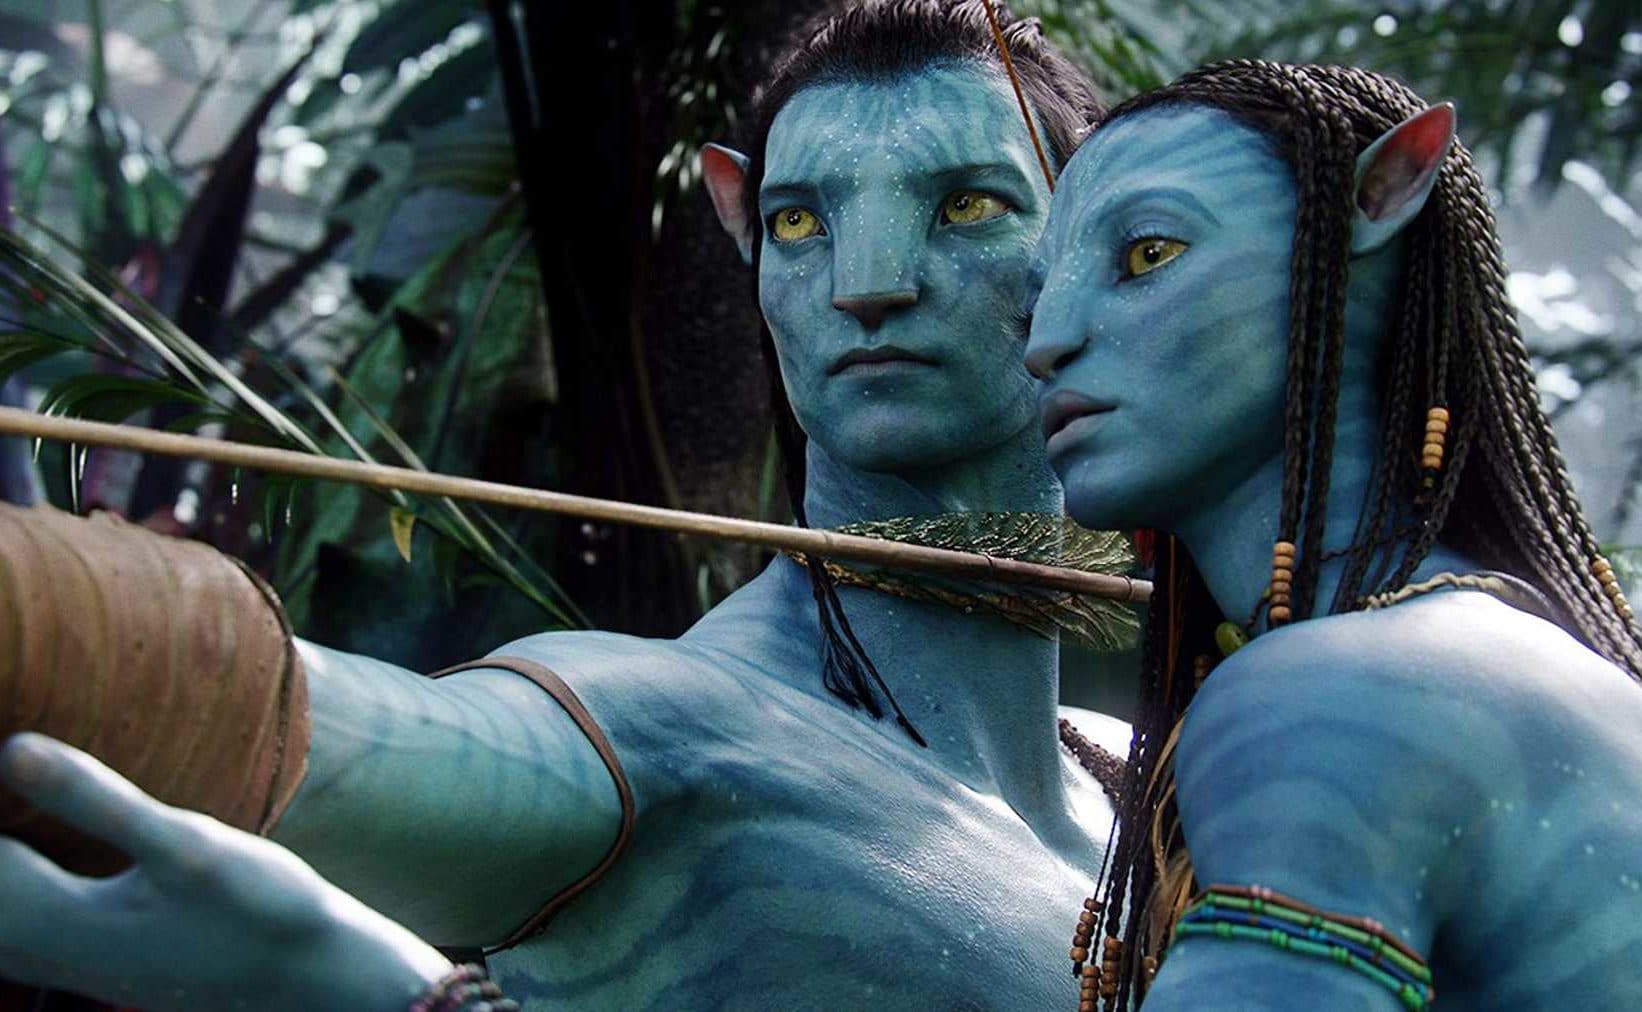 New Avatar 2 Story Details Reveal Family and Water-Based Adventure In Sequels